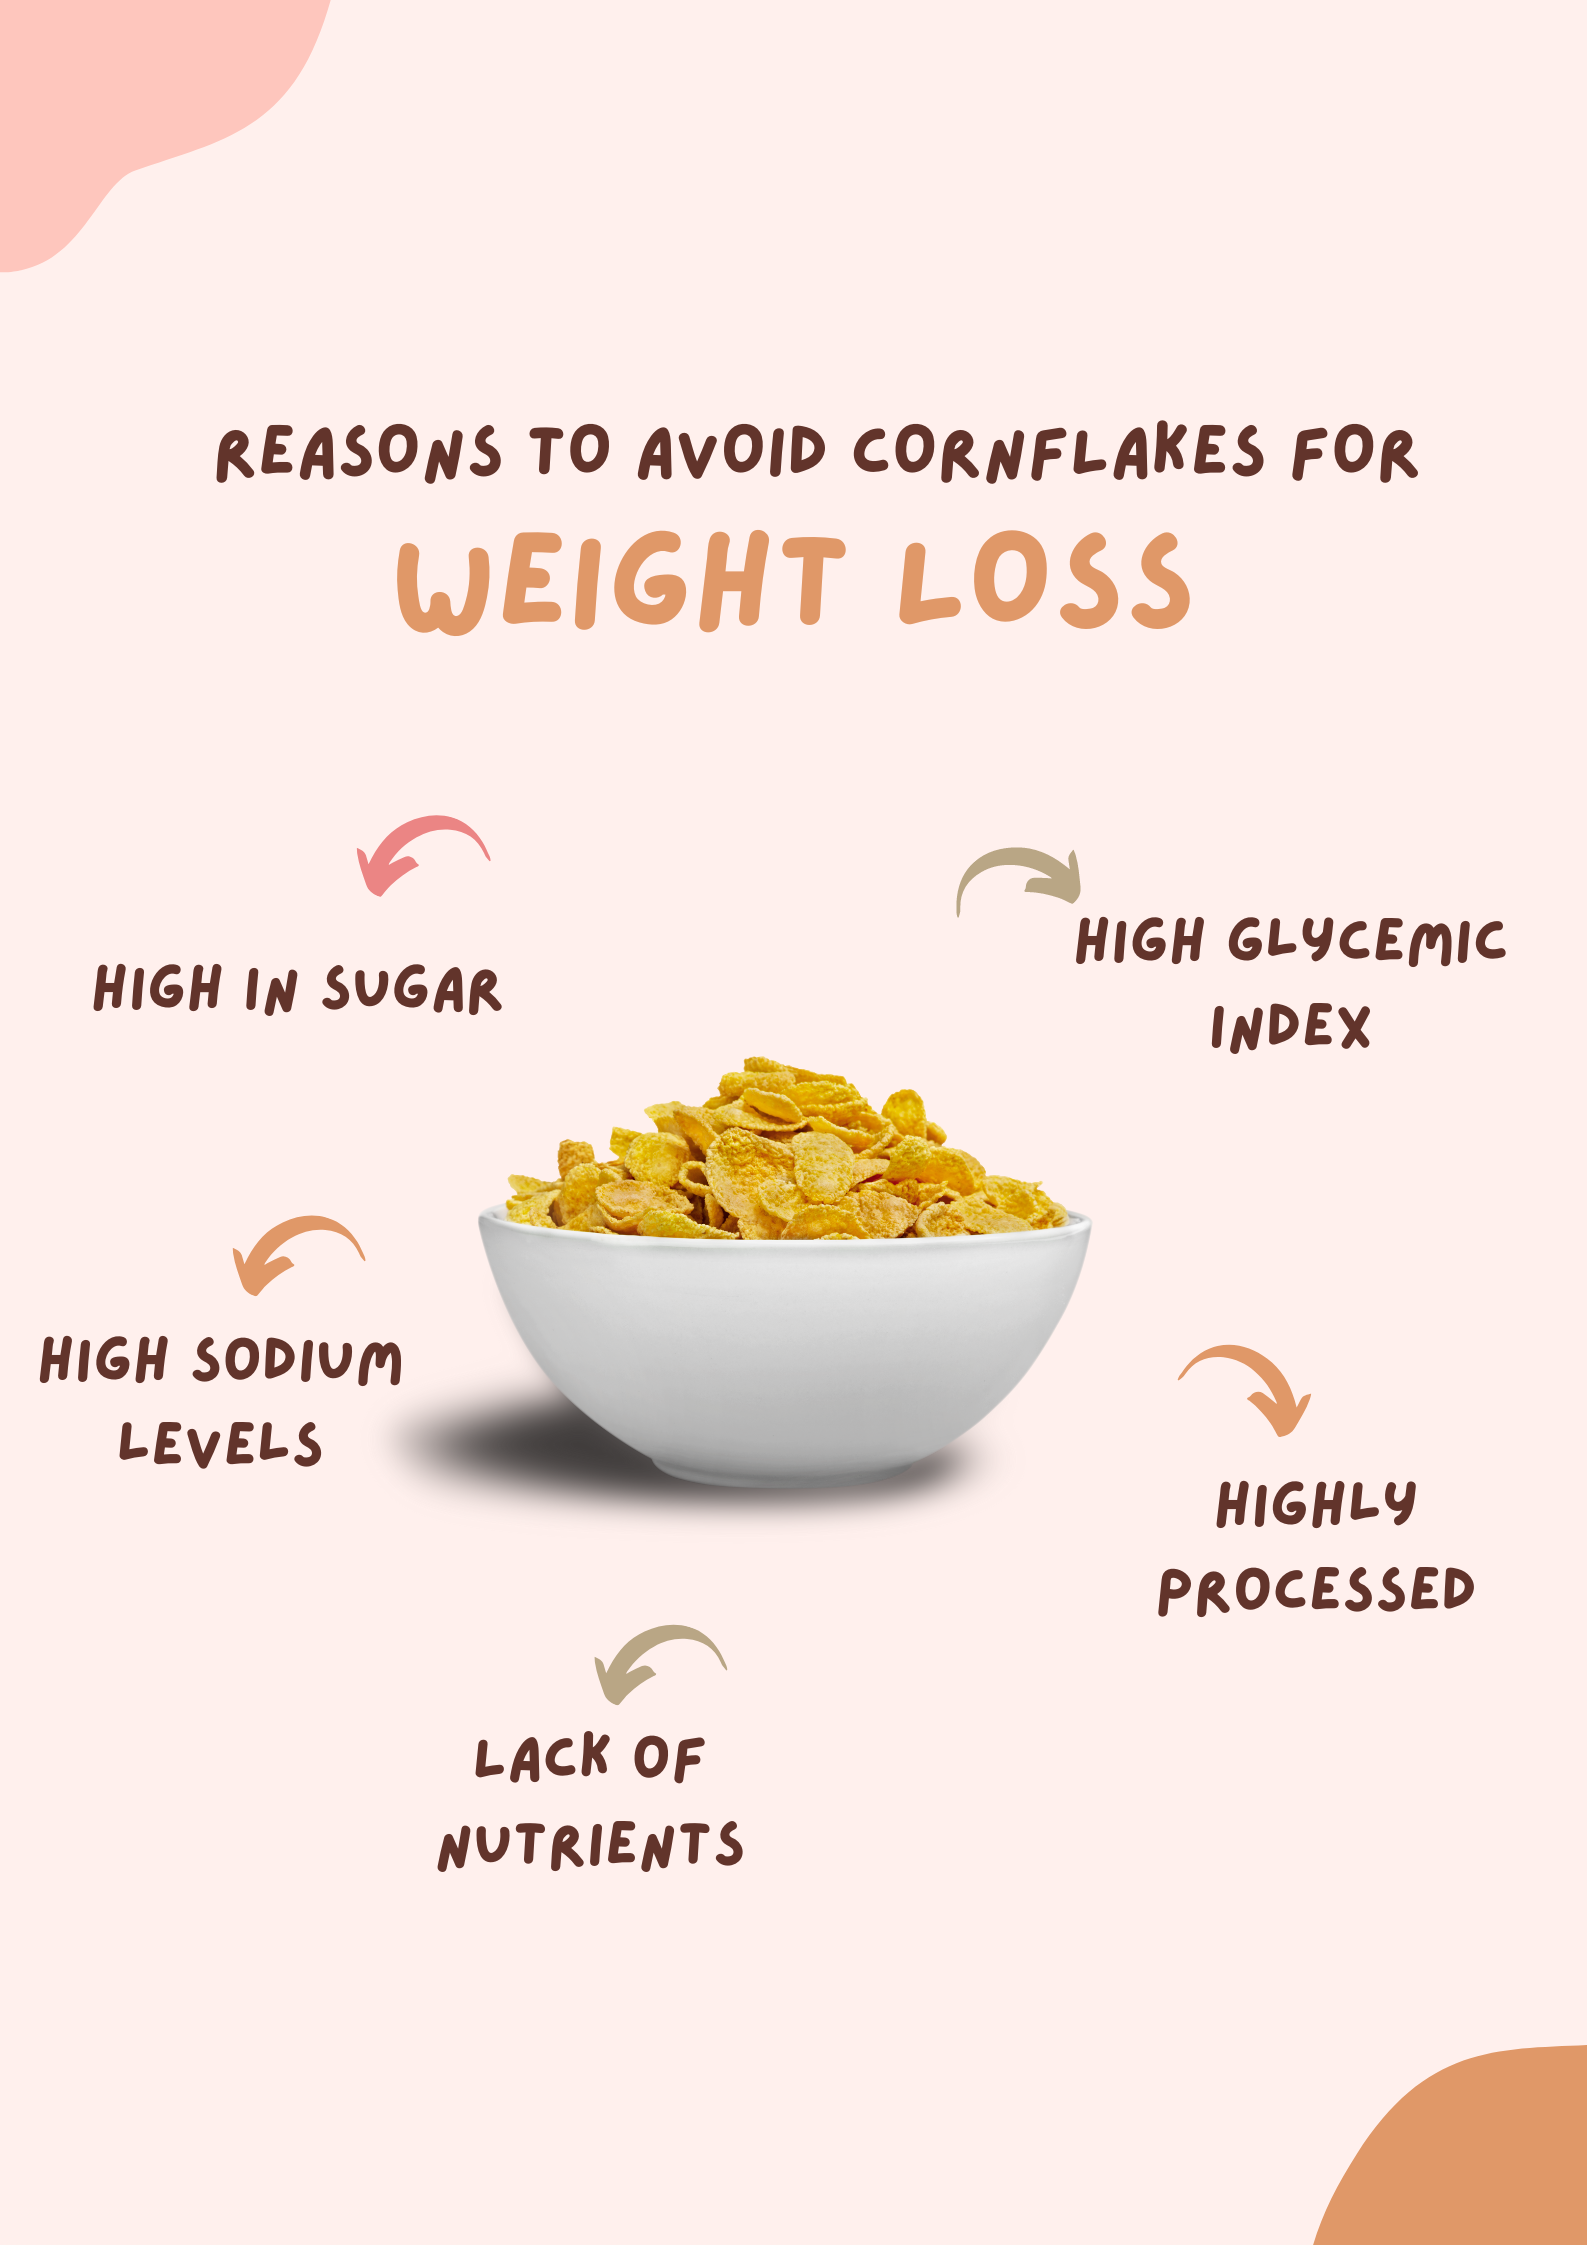 Reasons to avoid cornflakes for weight loss